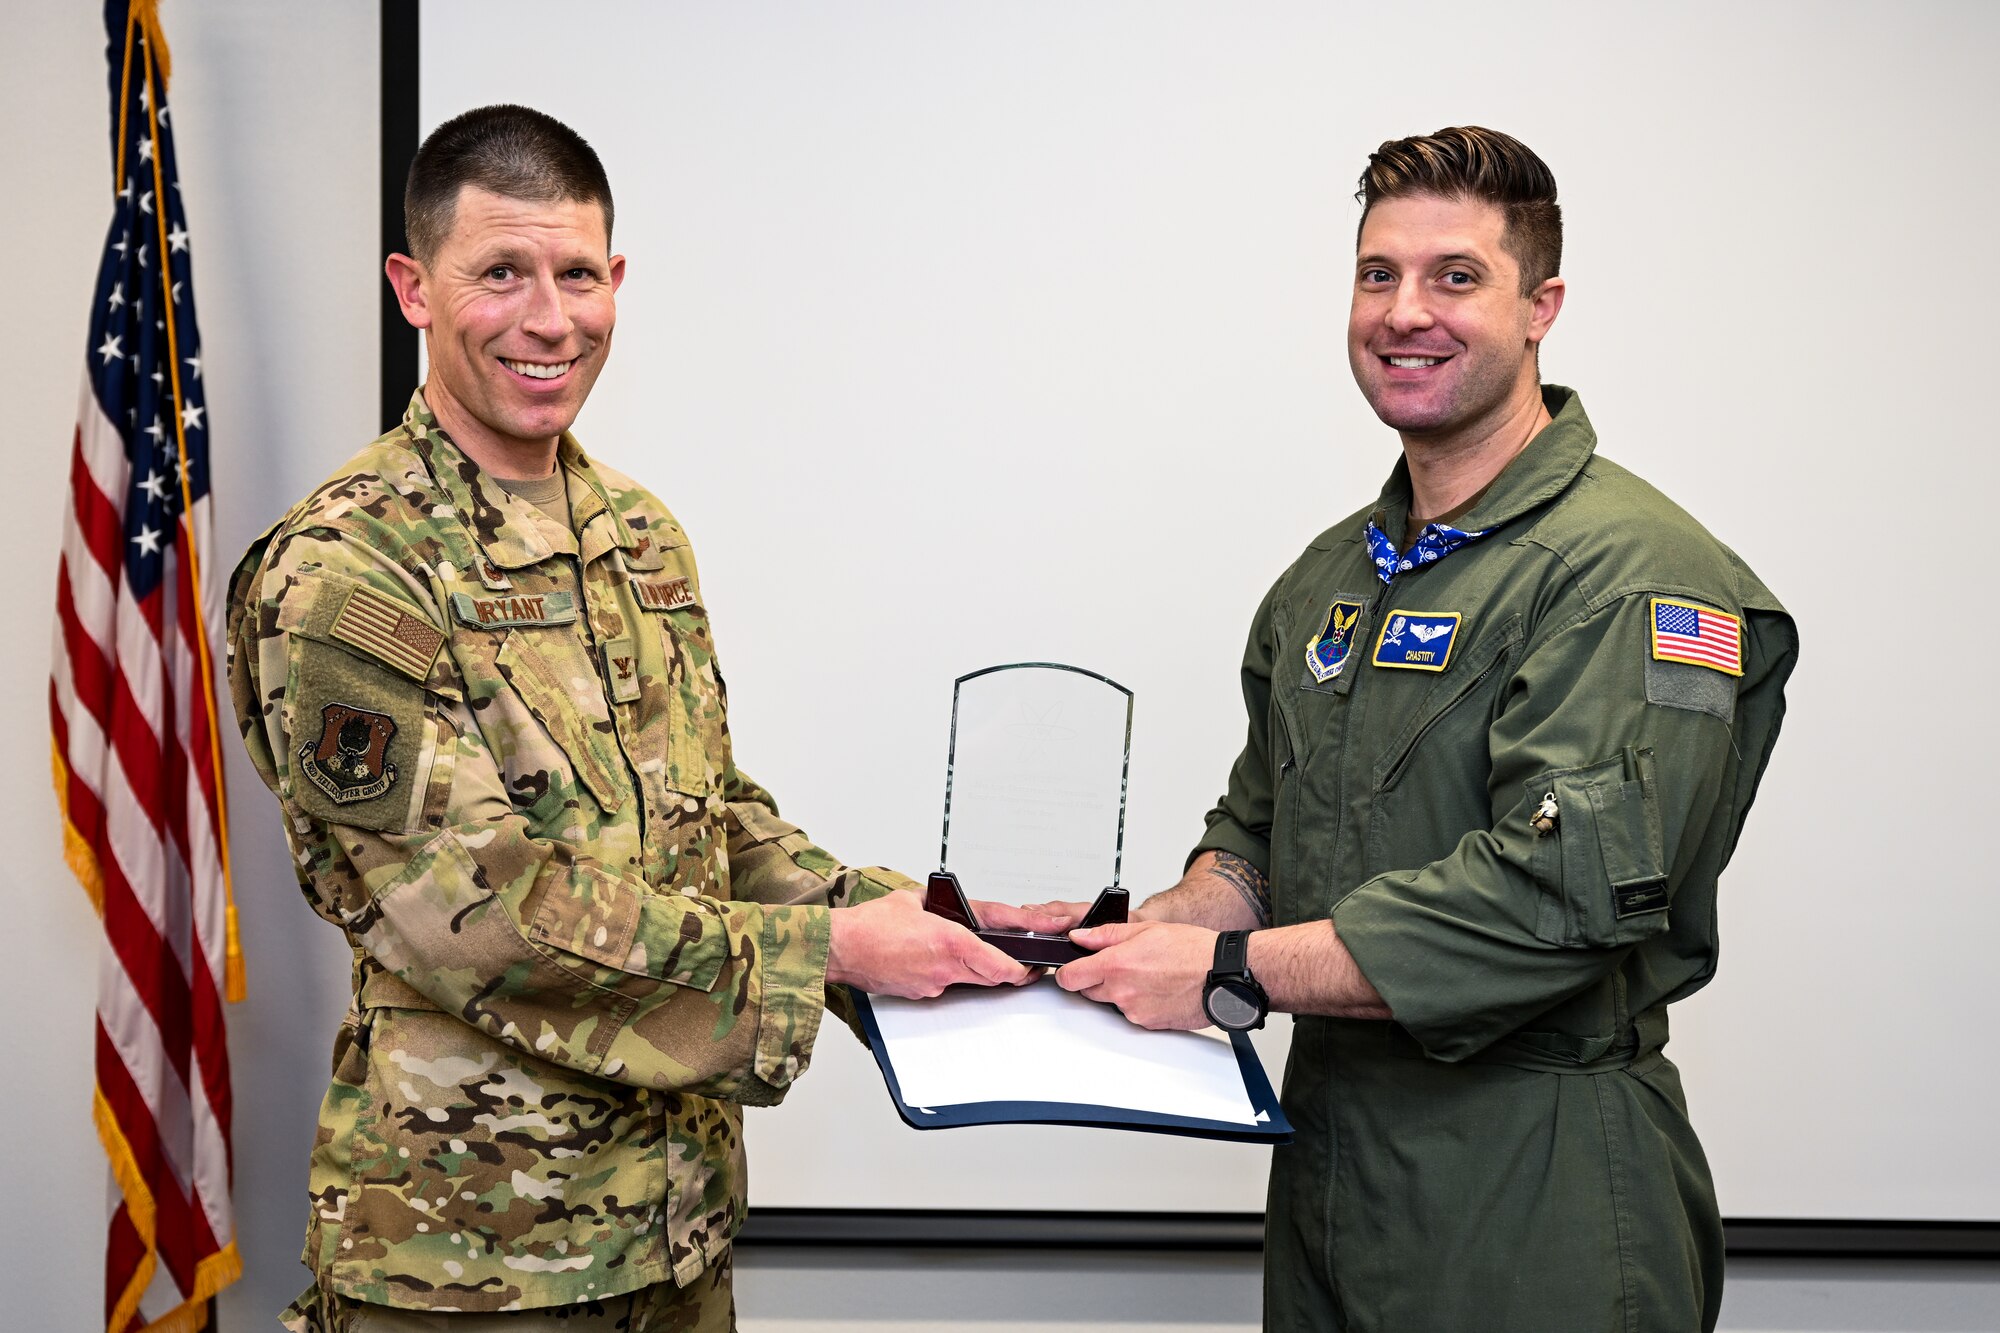 Col. Philip Bryant, 582nd Helicopter Group commander, recognizes Tech. Sgt. Ethan Williams, 37th Helicopter Squadron flight engineer, as the U.S. Air Force UH-1N Instructor Flight Engineer Reservist of the Year on F.E. Warren Air Force Base, Wyoming, June 9, 2023. Williams made significant contributions to the field of aerial nuclear security and aviation training. (U.S. Air Force photo by Joseph Coslett Jr.)